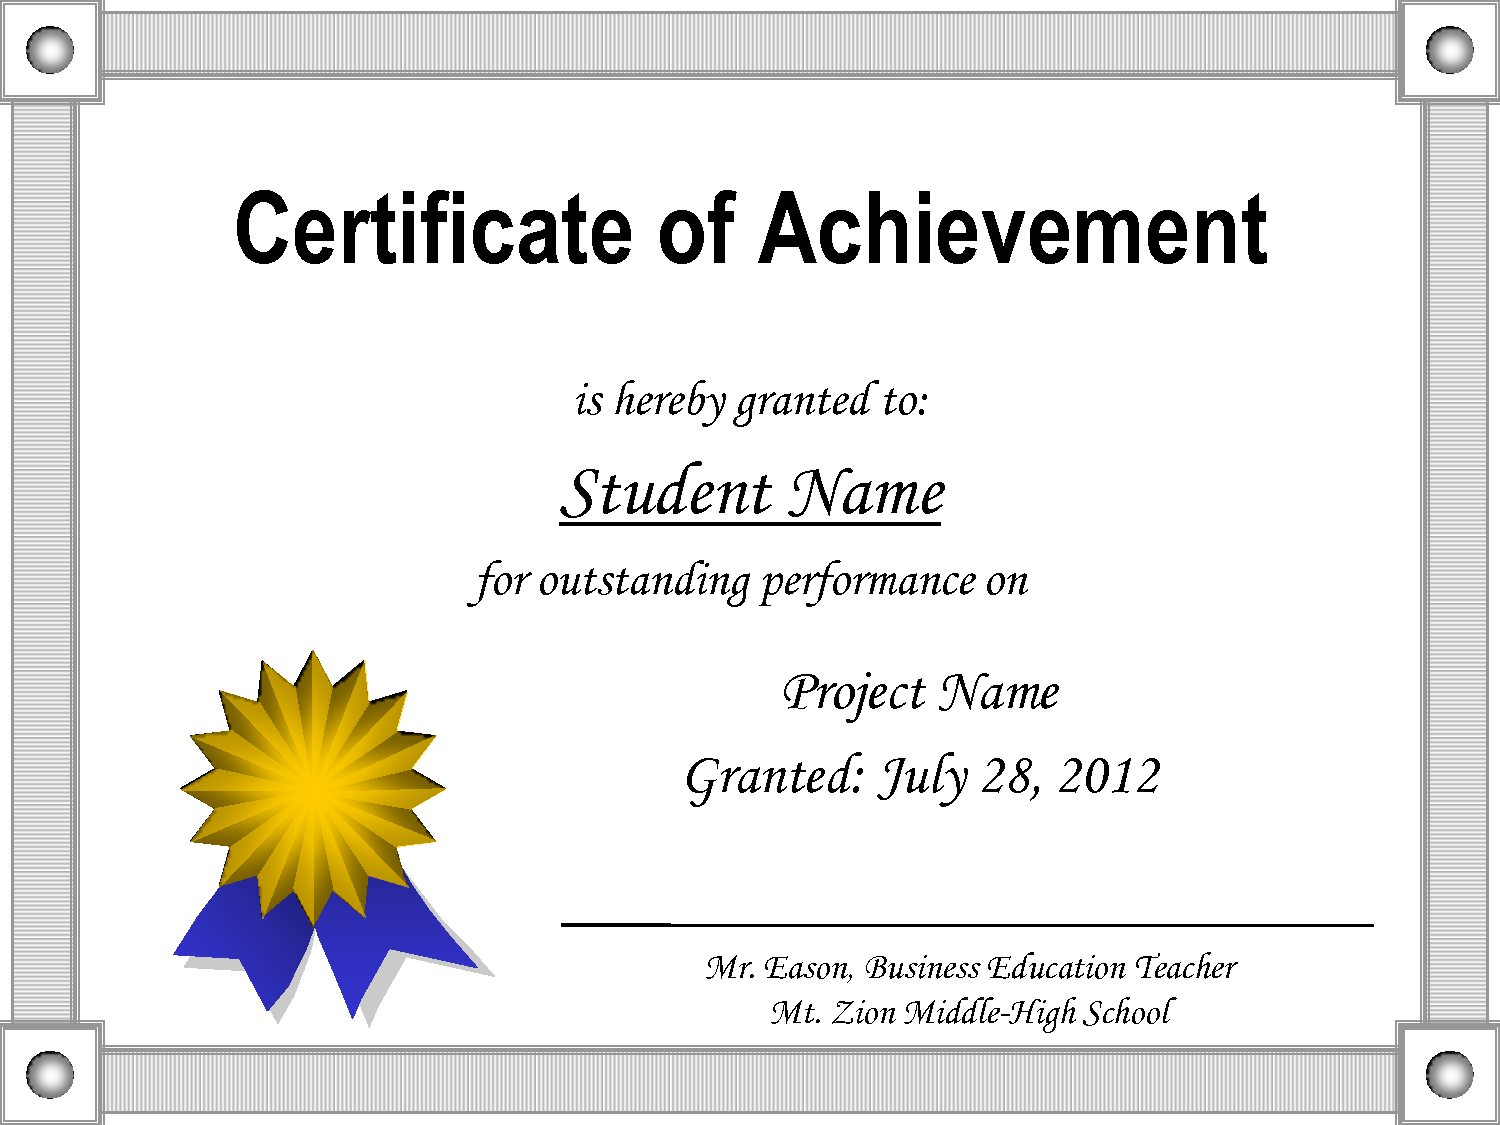 Achievement Certificate Template Free – Cerescoffee.co Pertaining To Blank Certificate Of Achievement Template